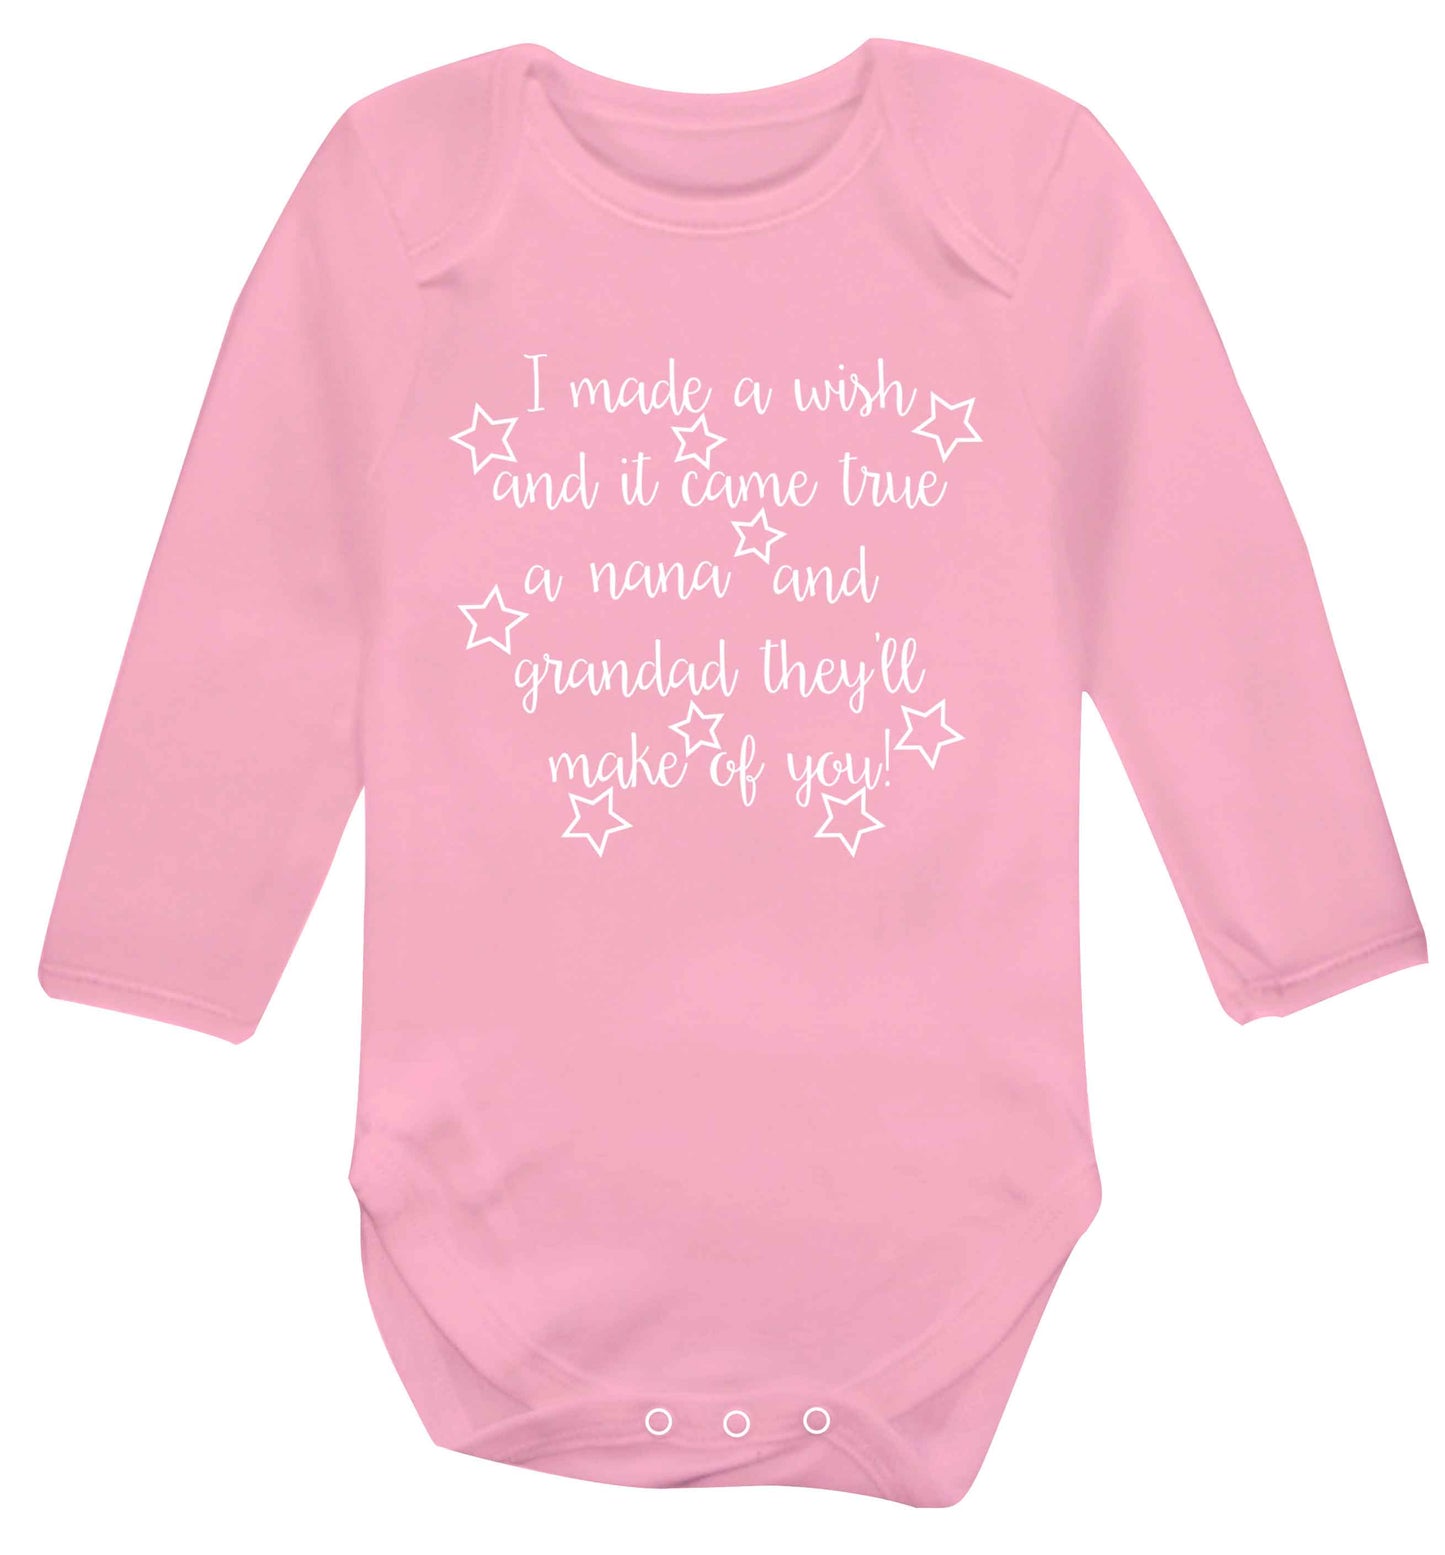 I made a wish and it came true a nana and grandad they'll make of you! Baby Vest long sleeved pale pink 6-12 months